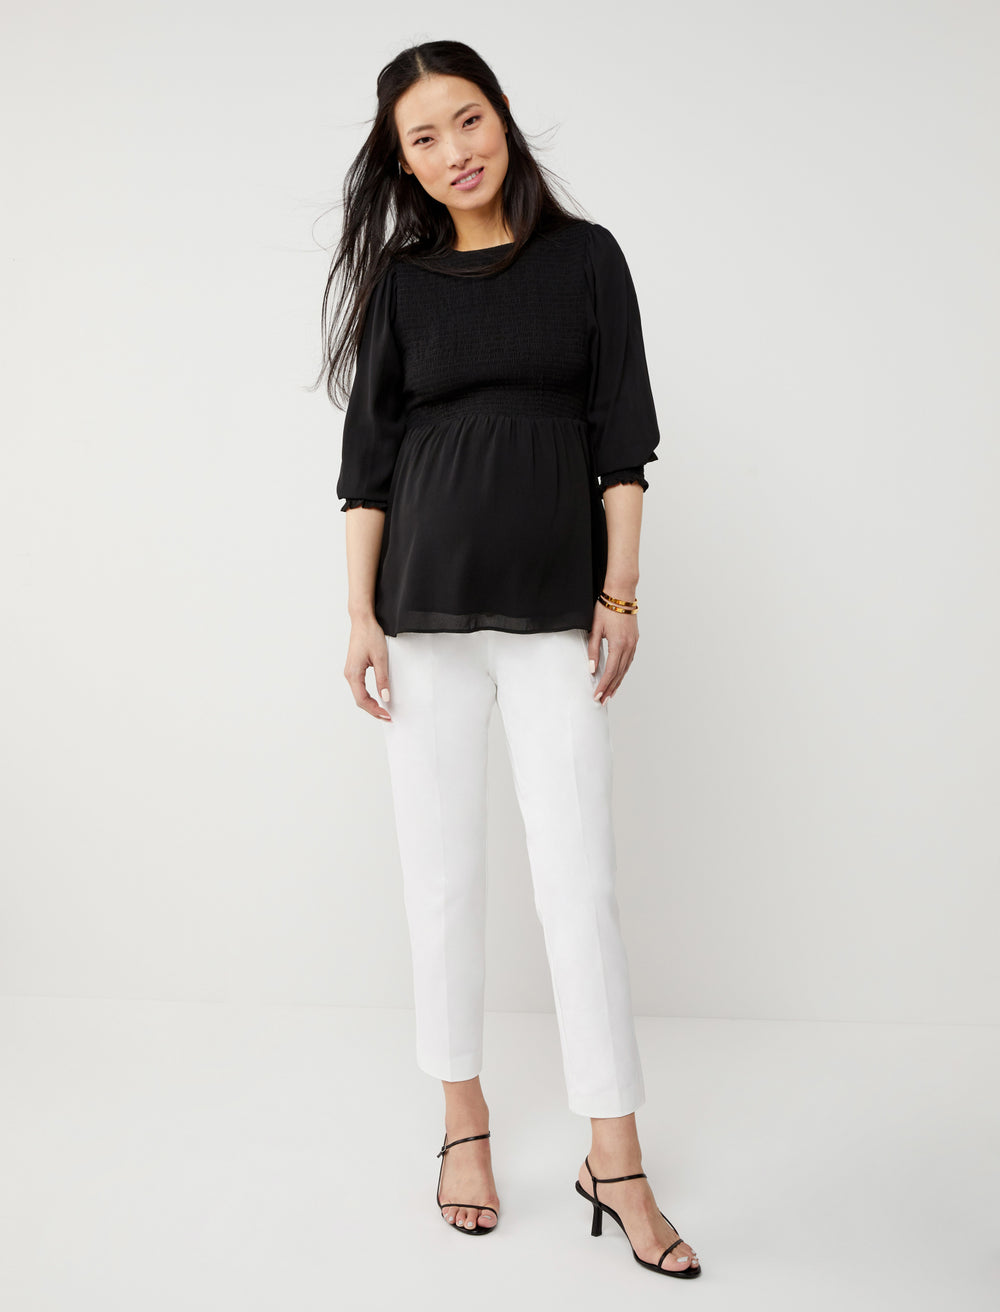 The Curie Secret Fit Belly Twill Slim Ankle Maternity Pant - A Pea